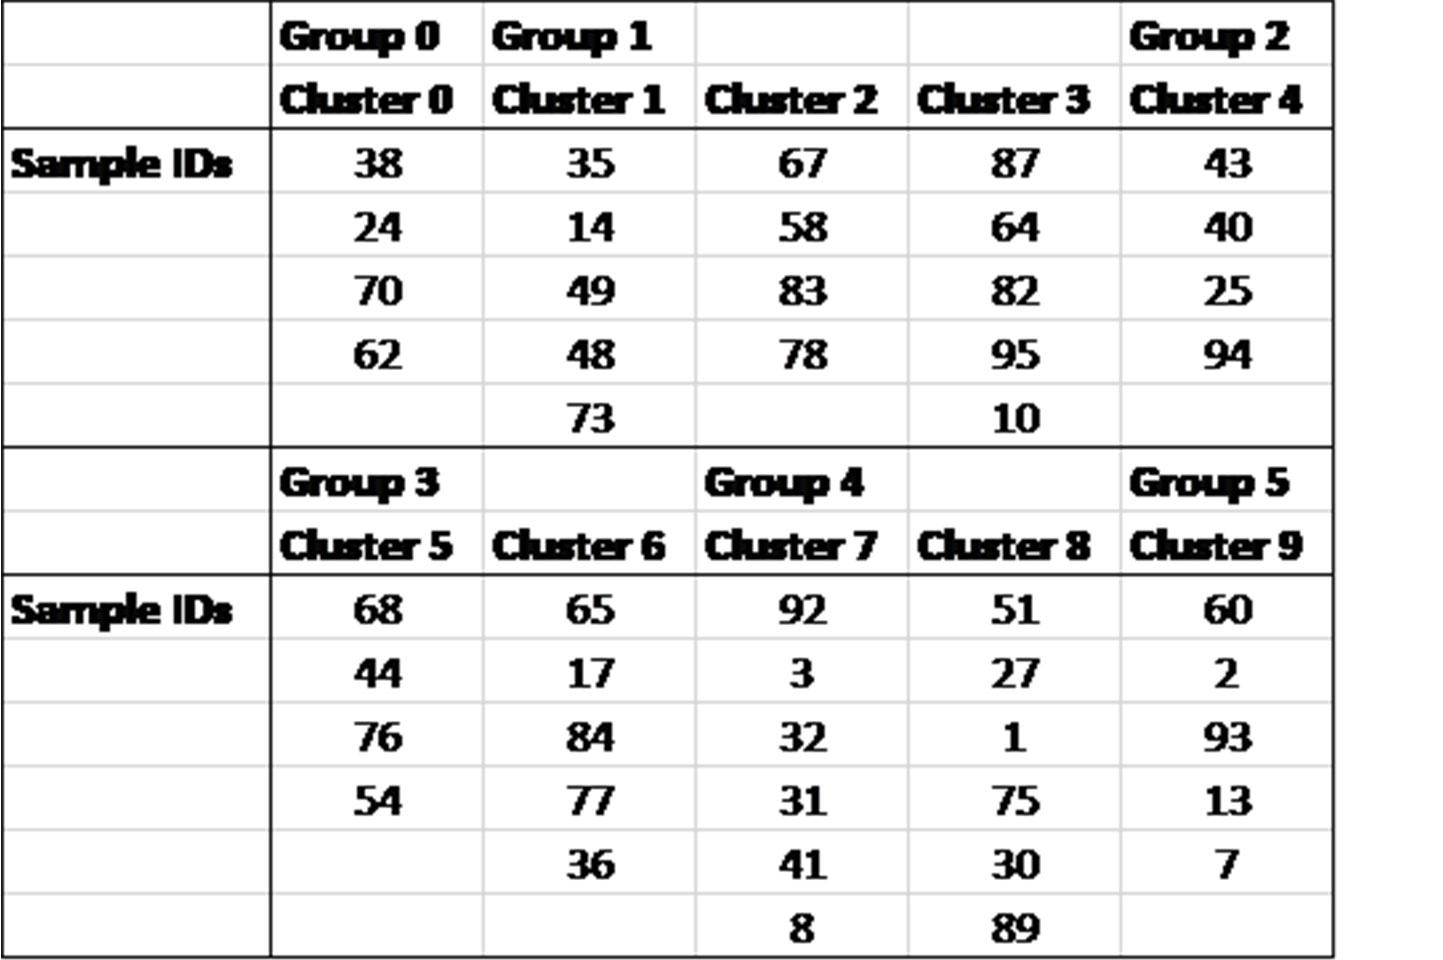 Figure 11: Samples that cluster together into groups and subgroups (=clusters).